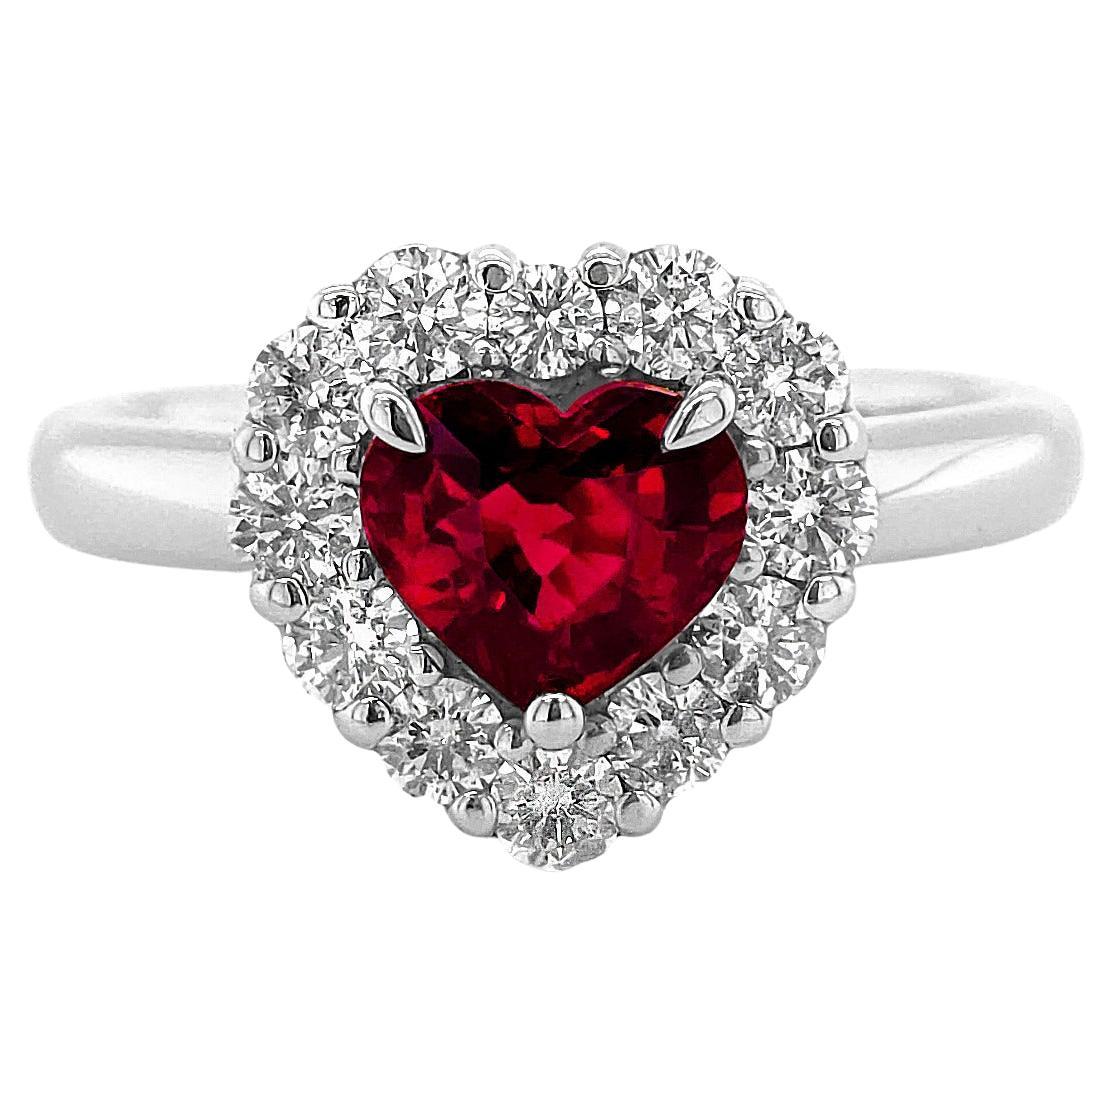 AIGS Certified 1.25 Carats "Pigeon Blood" Ruby Diamonds set in Platinum Ring For Sale